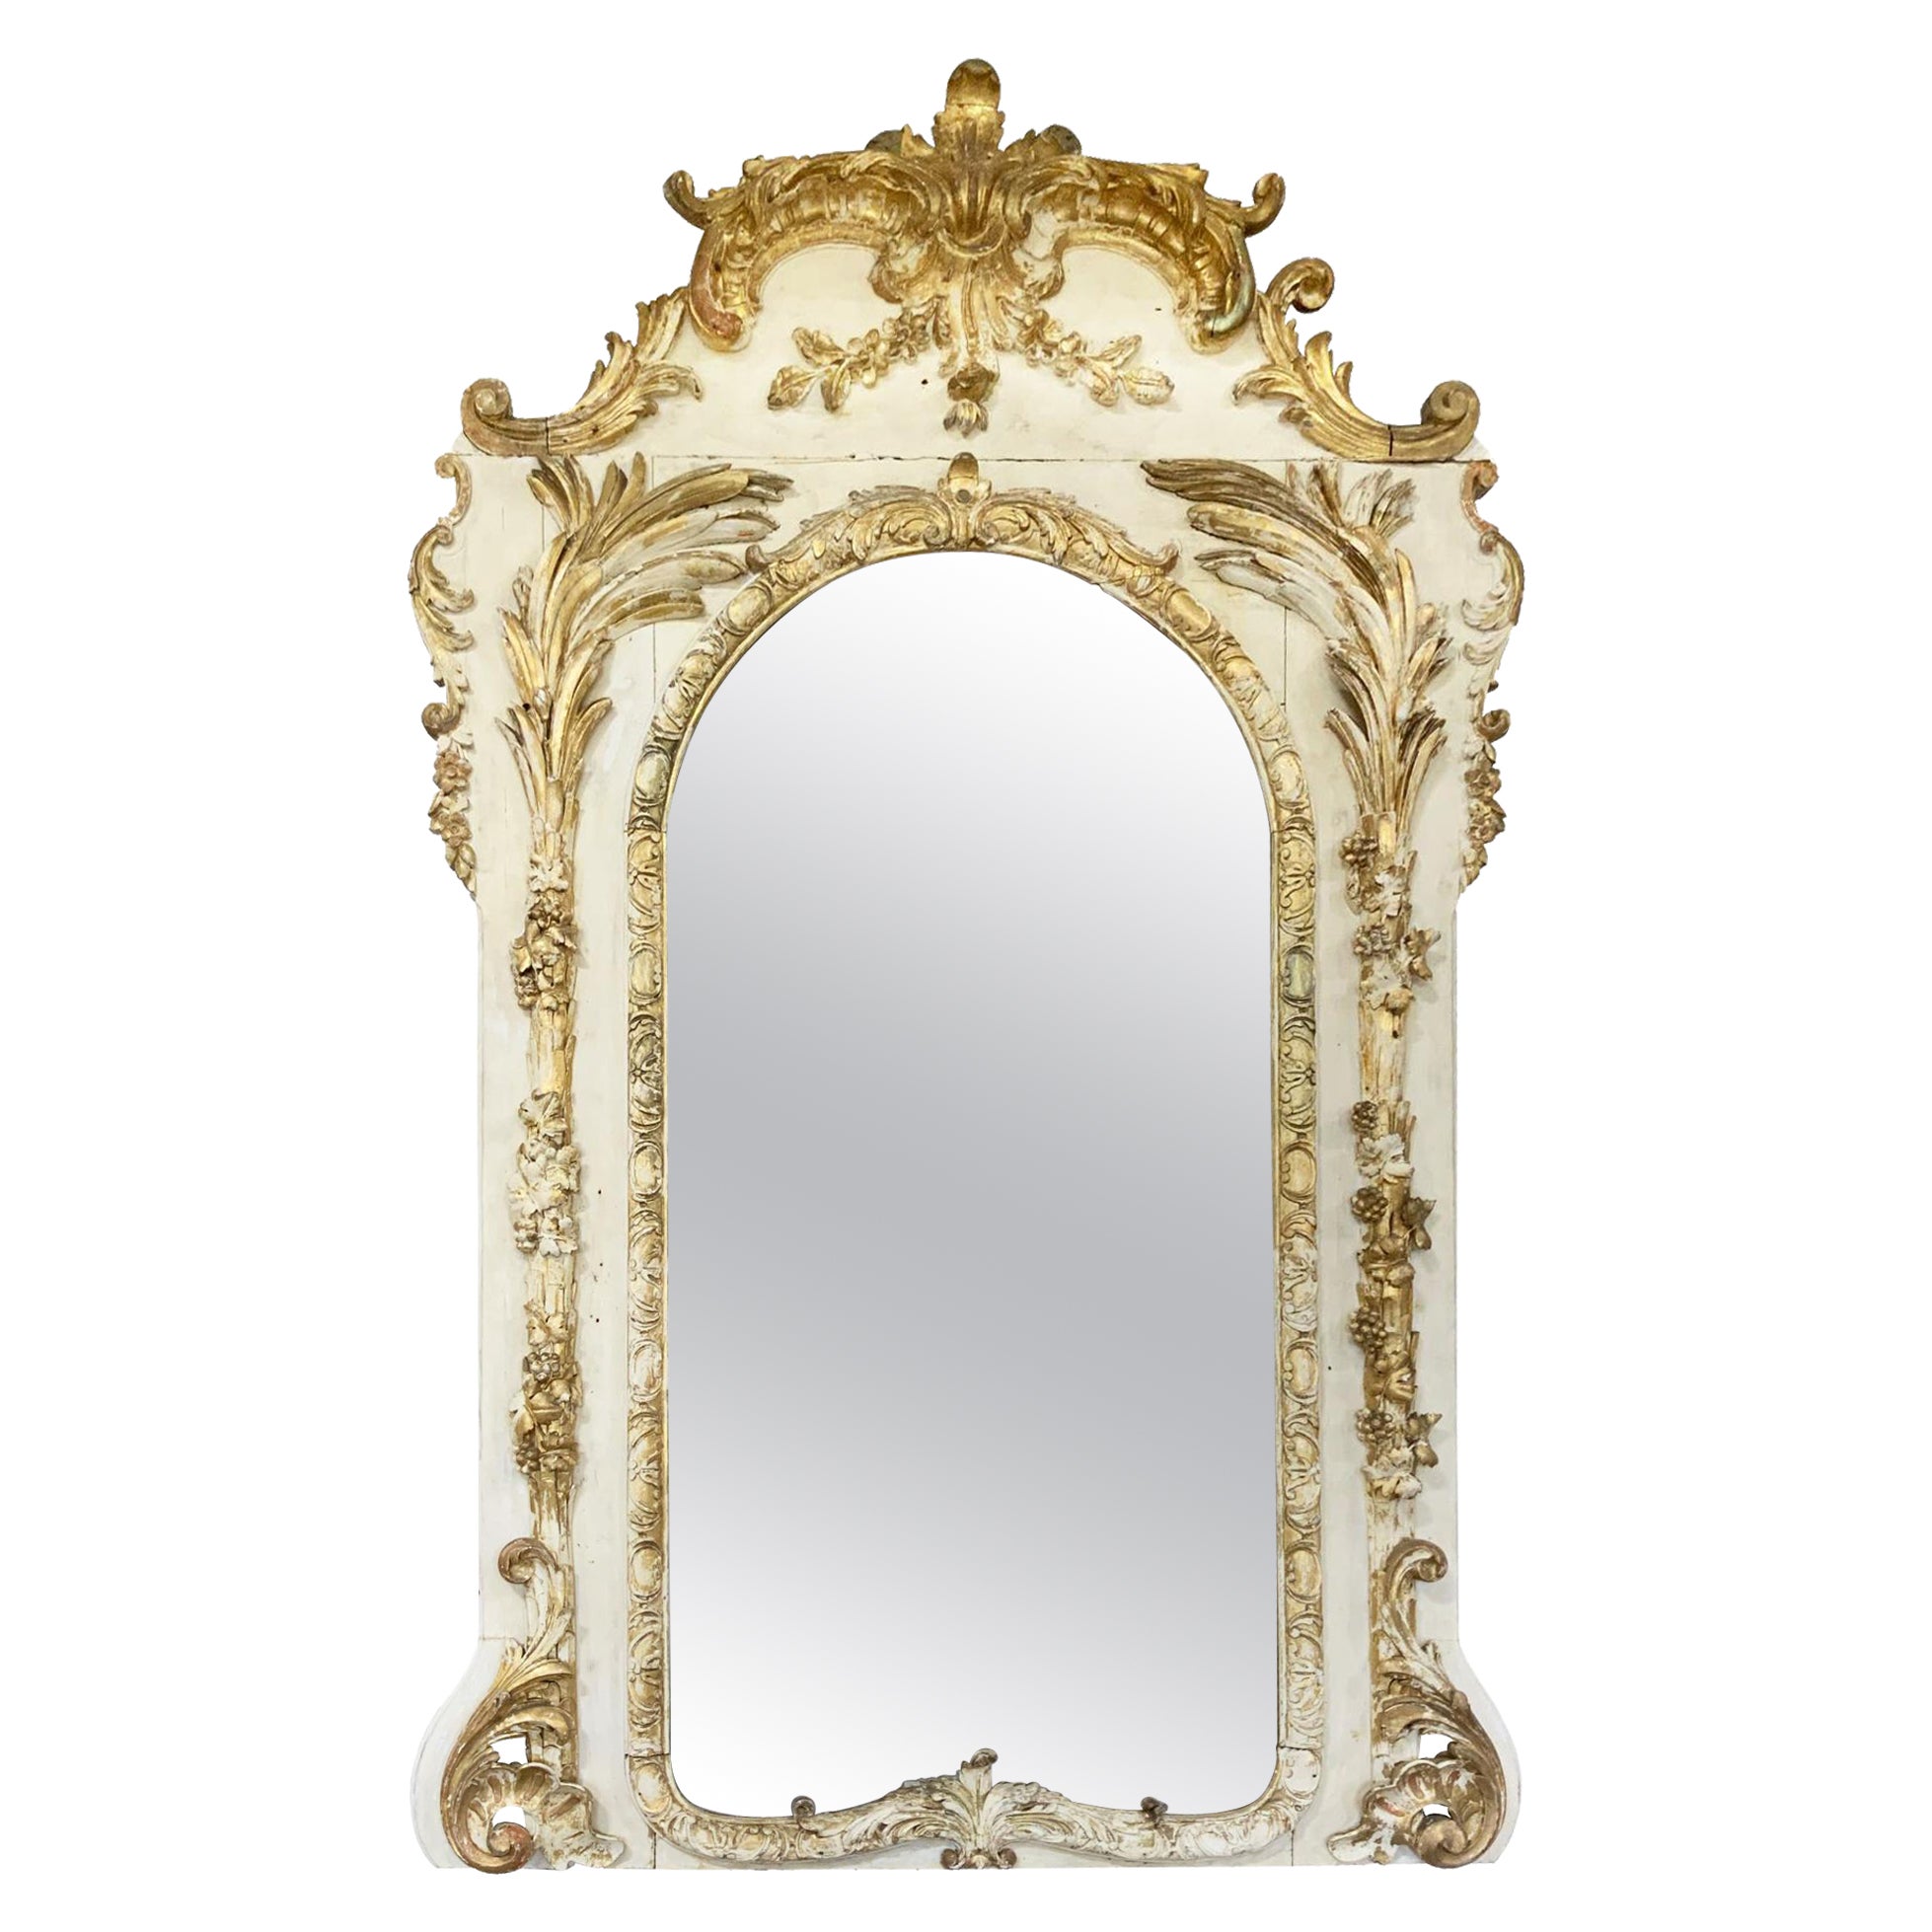 19th Century French White/Cream and Gold French Mirror